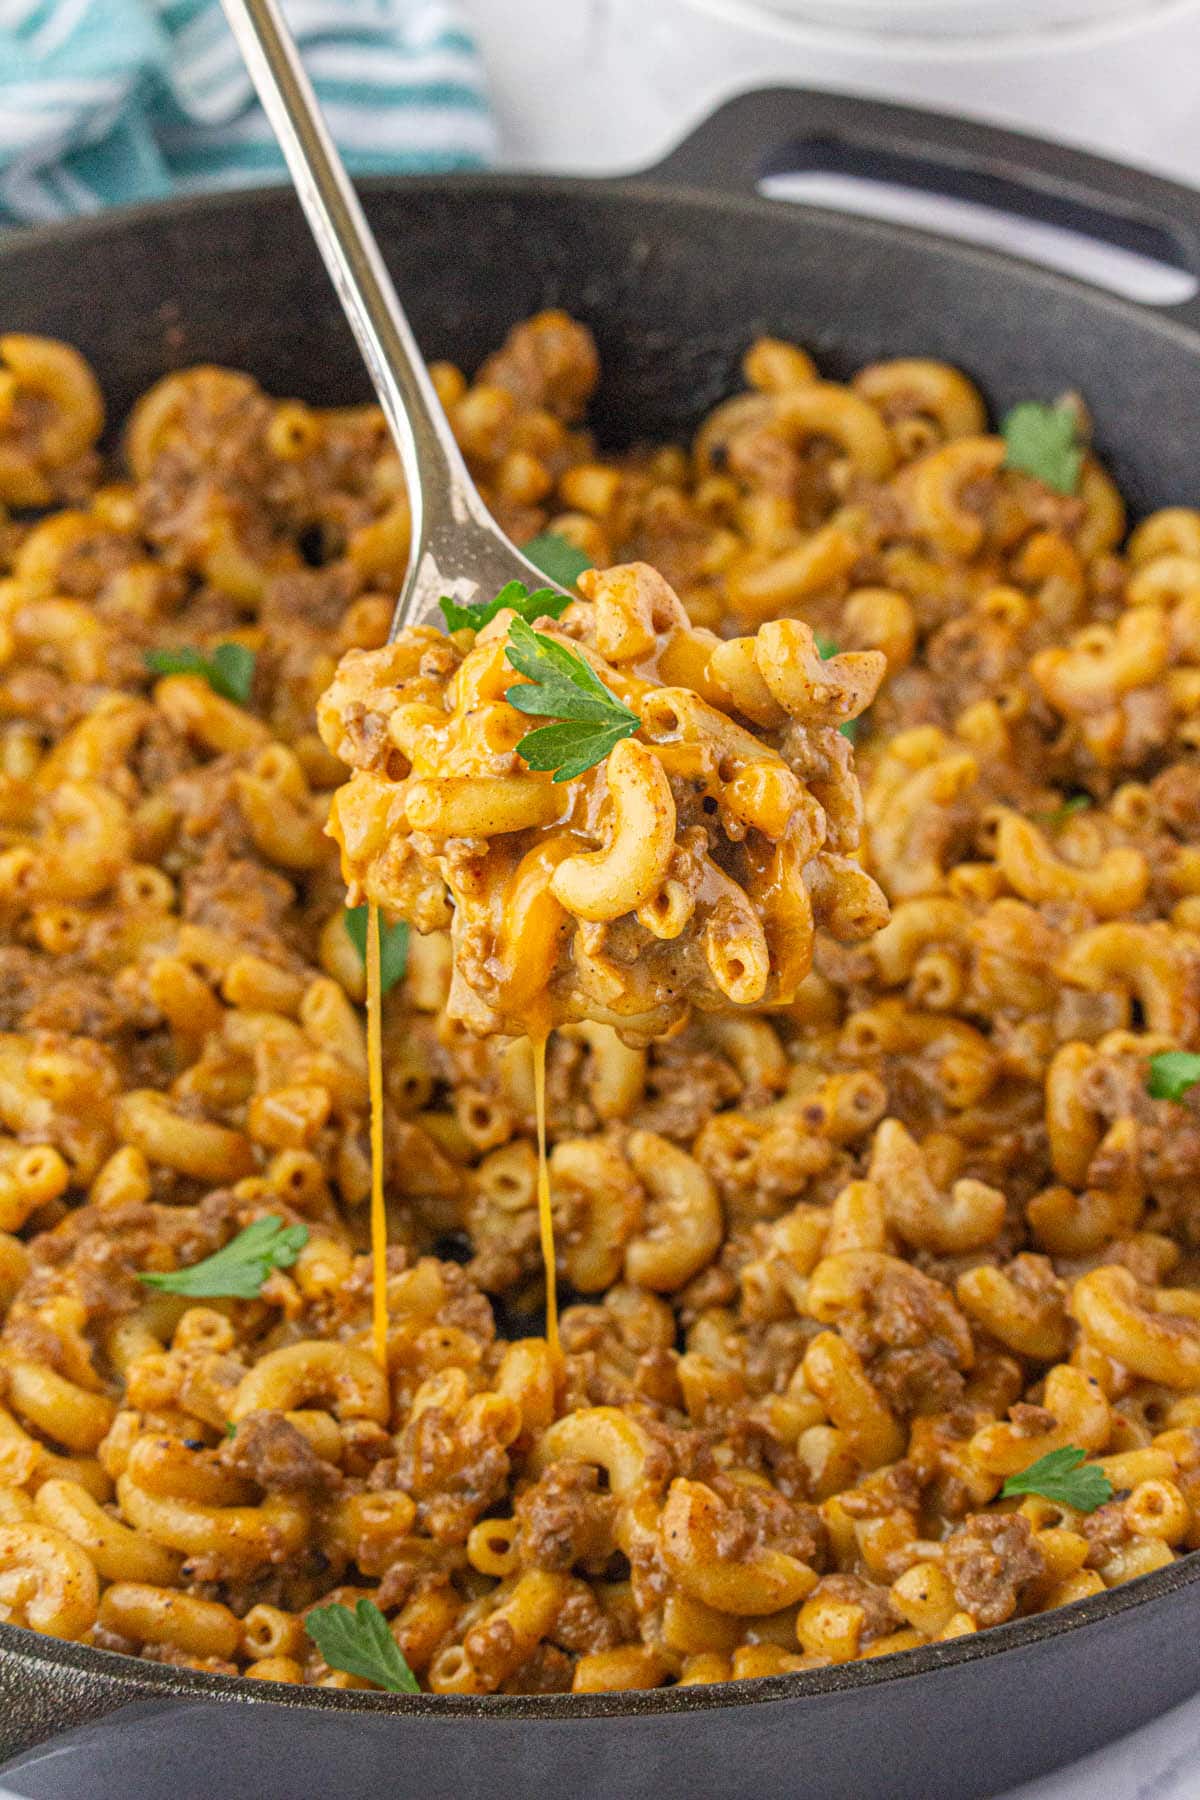 Cast iron skillet filled with homemade cheesy hamburger helper. With a serving spoon taking a scoop.